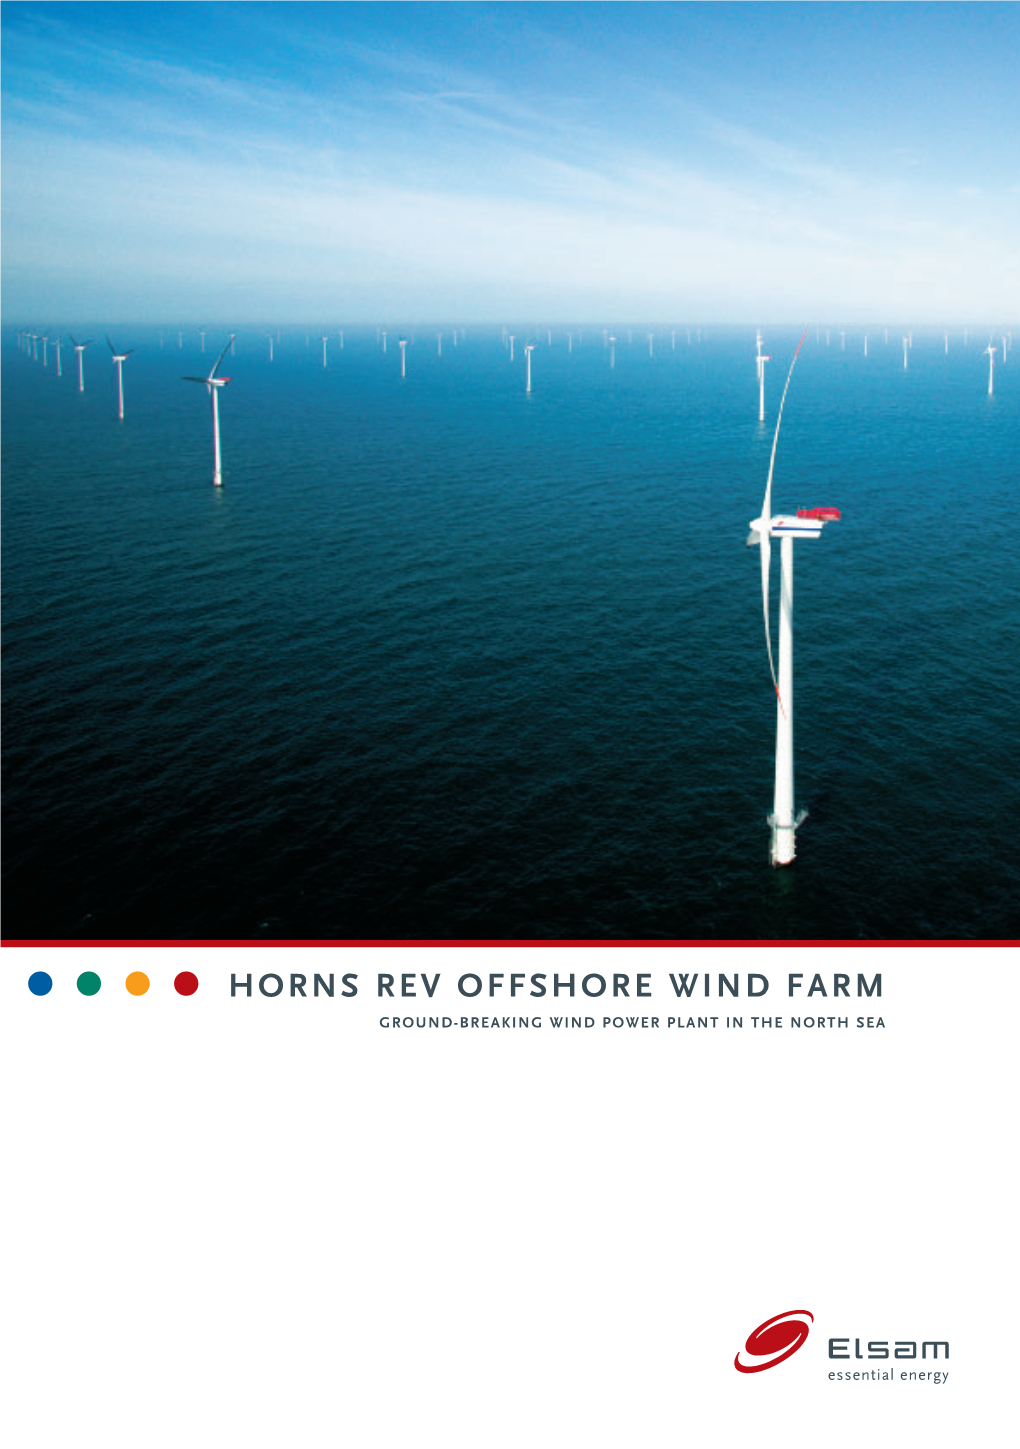 HORNS REV OFFSHORE WIND FARM GROUND-BREAKING WIND POWER PLANT in the NORTH SEA Horns Rev GB 04/07/03 13:35 Side 2